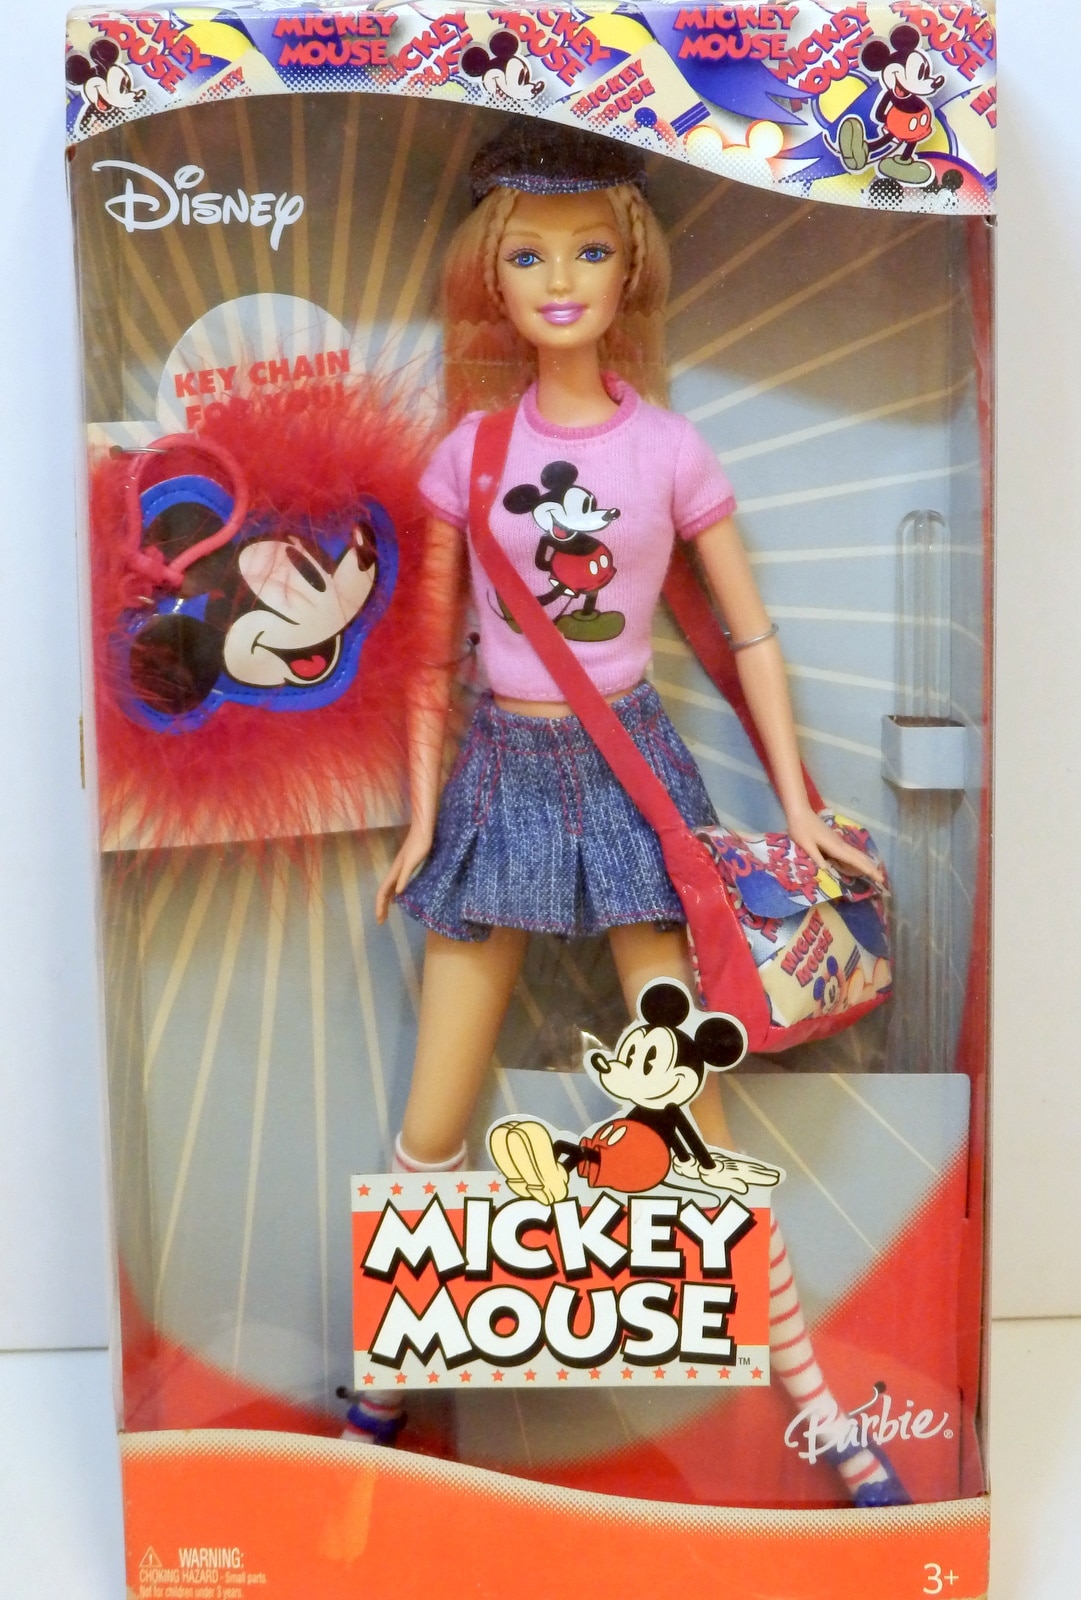 barbie mickey mouse